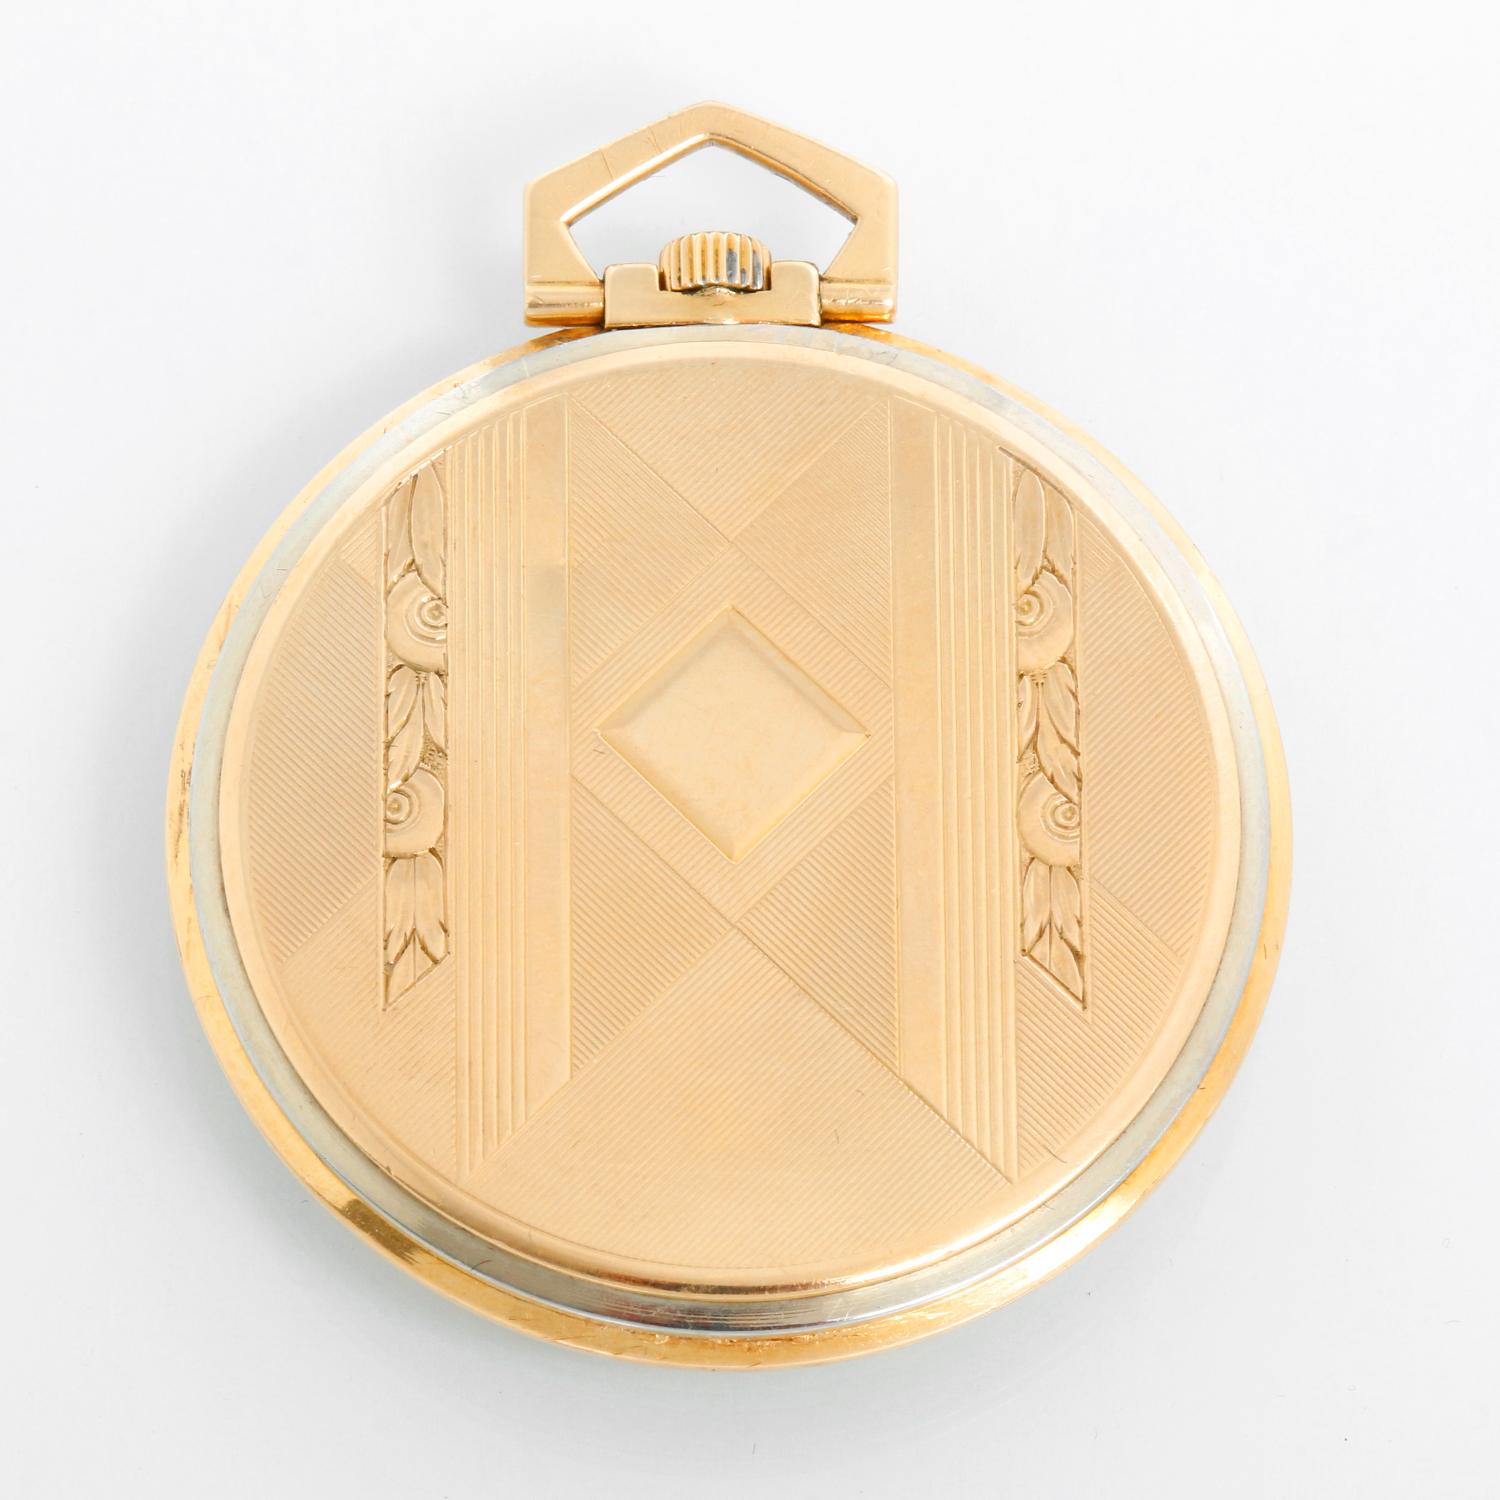 Art Deco Vintage Omega 18K Yellow Gold Pocket Watch - Manual winding. 18k Two-tone white and yellow gold case with ornately engraved case back and blank initial shield (44 mm ). Champagne dial with Arabic numerals. Pre-owned with custom box. Circa